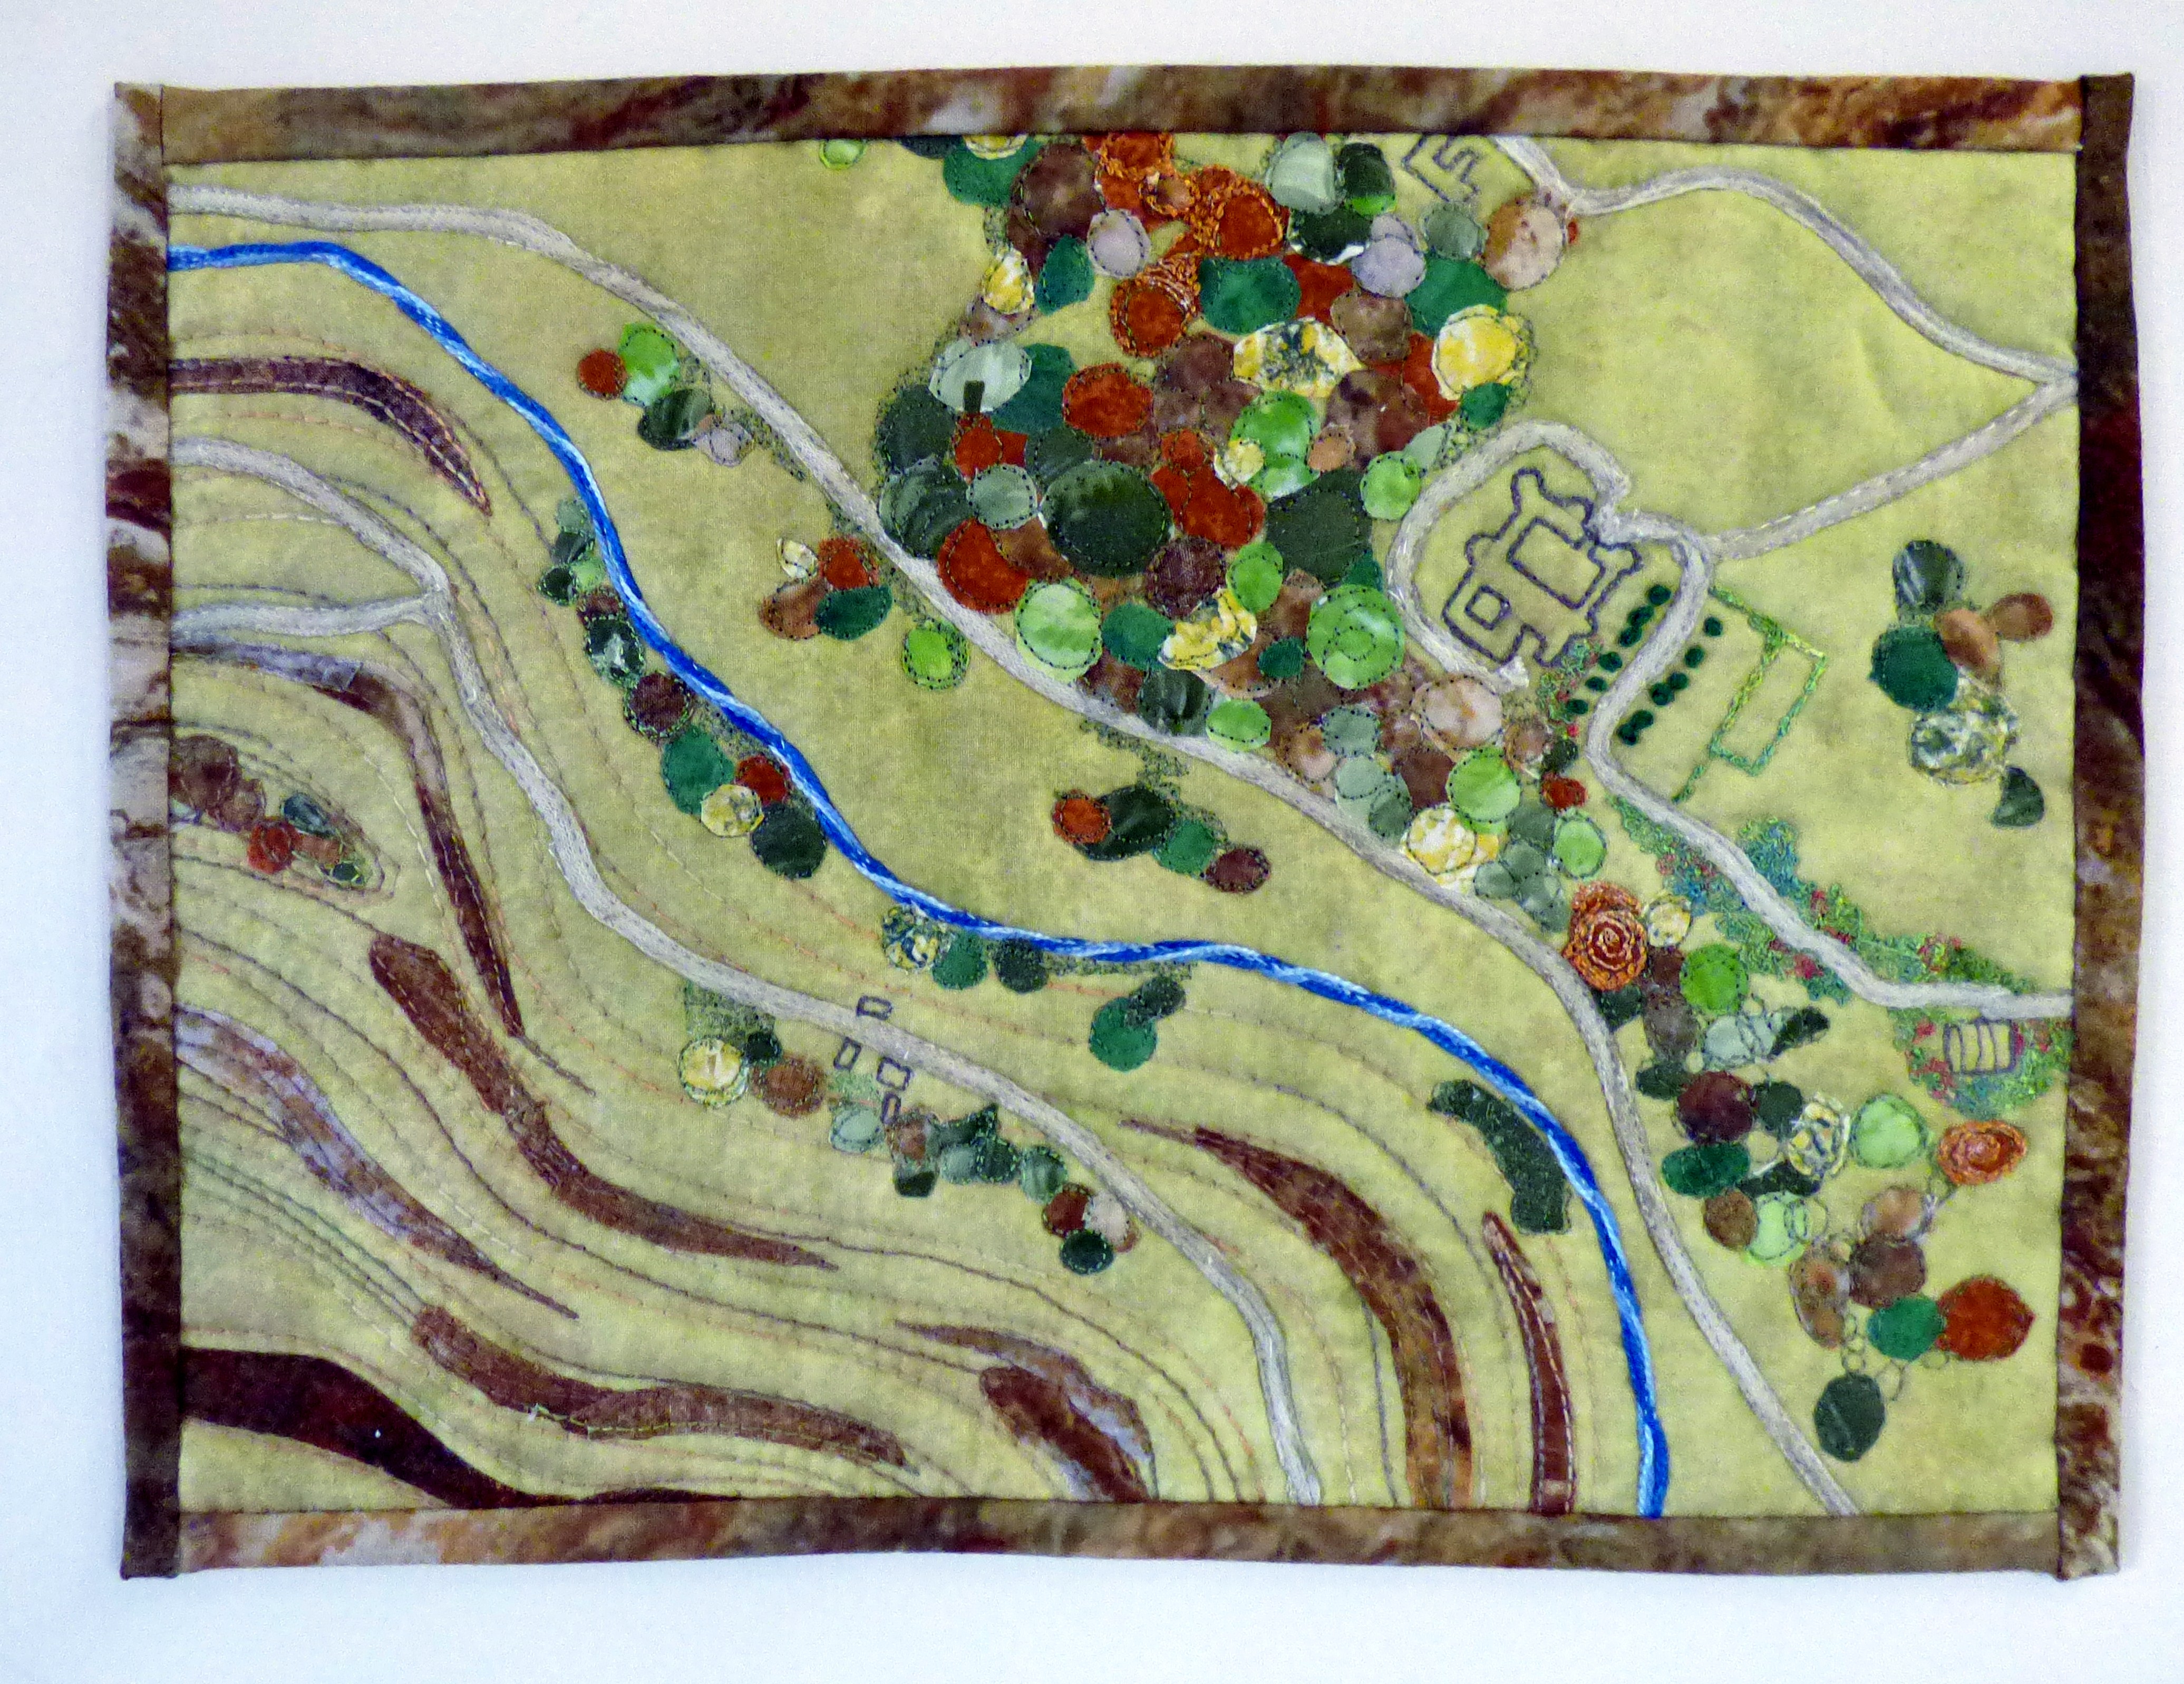 embroidery by Mary Bryning at "Maps in Stitch" Talk by Mary Bryning, October 2023